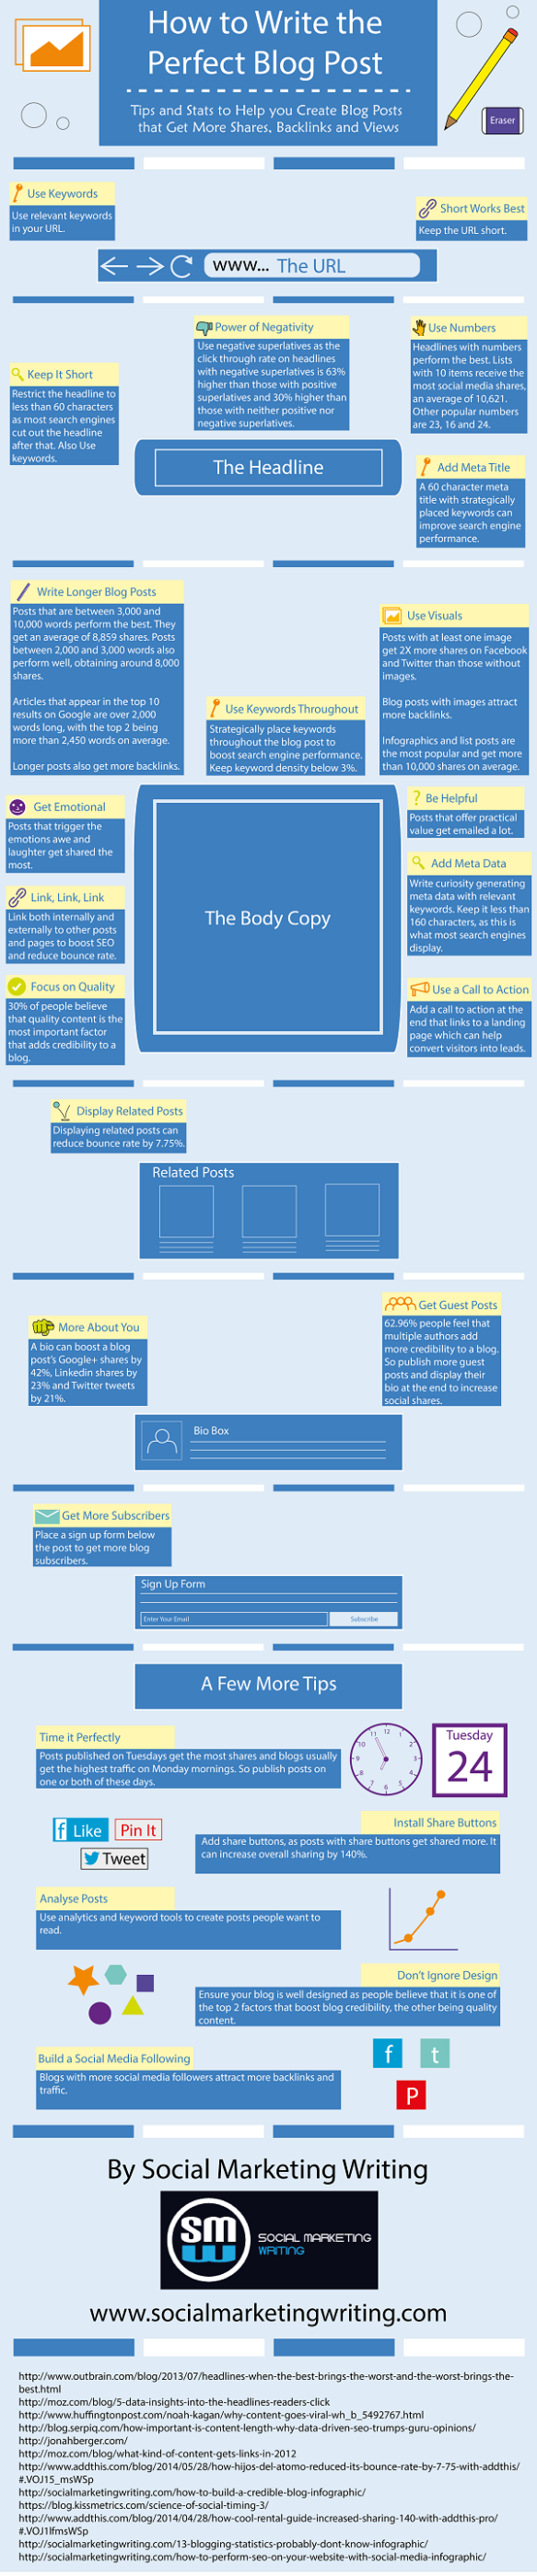 How-to-Write-the-Perfect-Blog-Post-Infographic